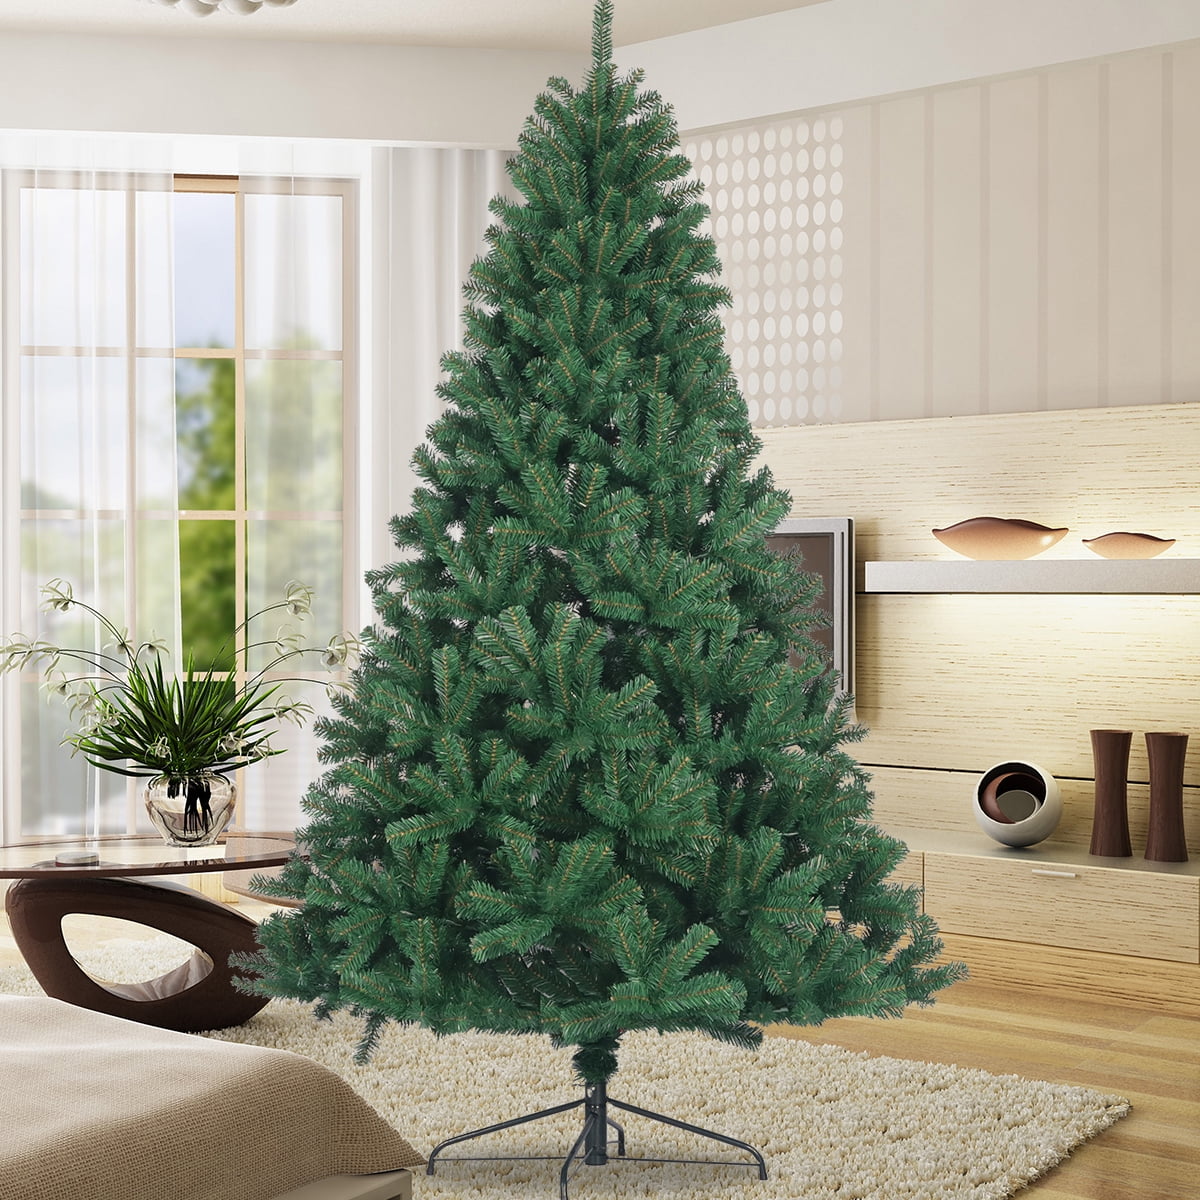 SYNGAR Christmas Decorations, 7.5ft Artificial Christmas Tree 